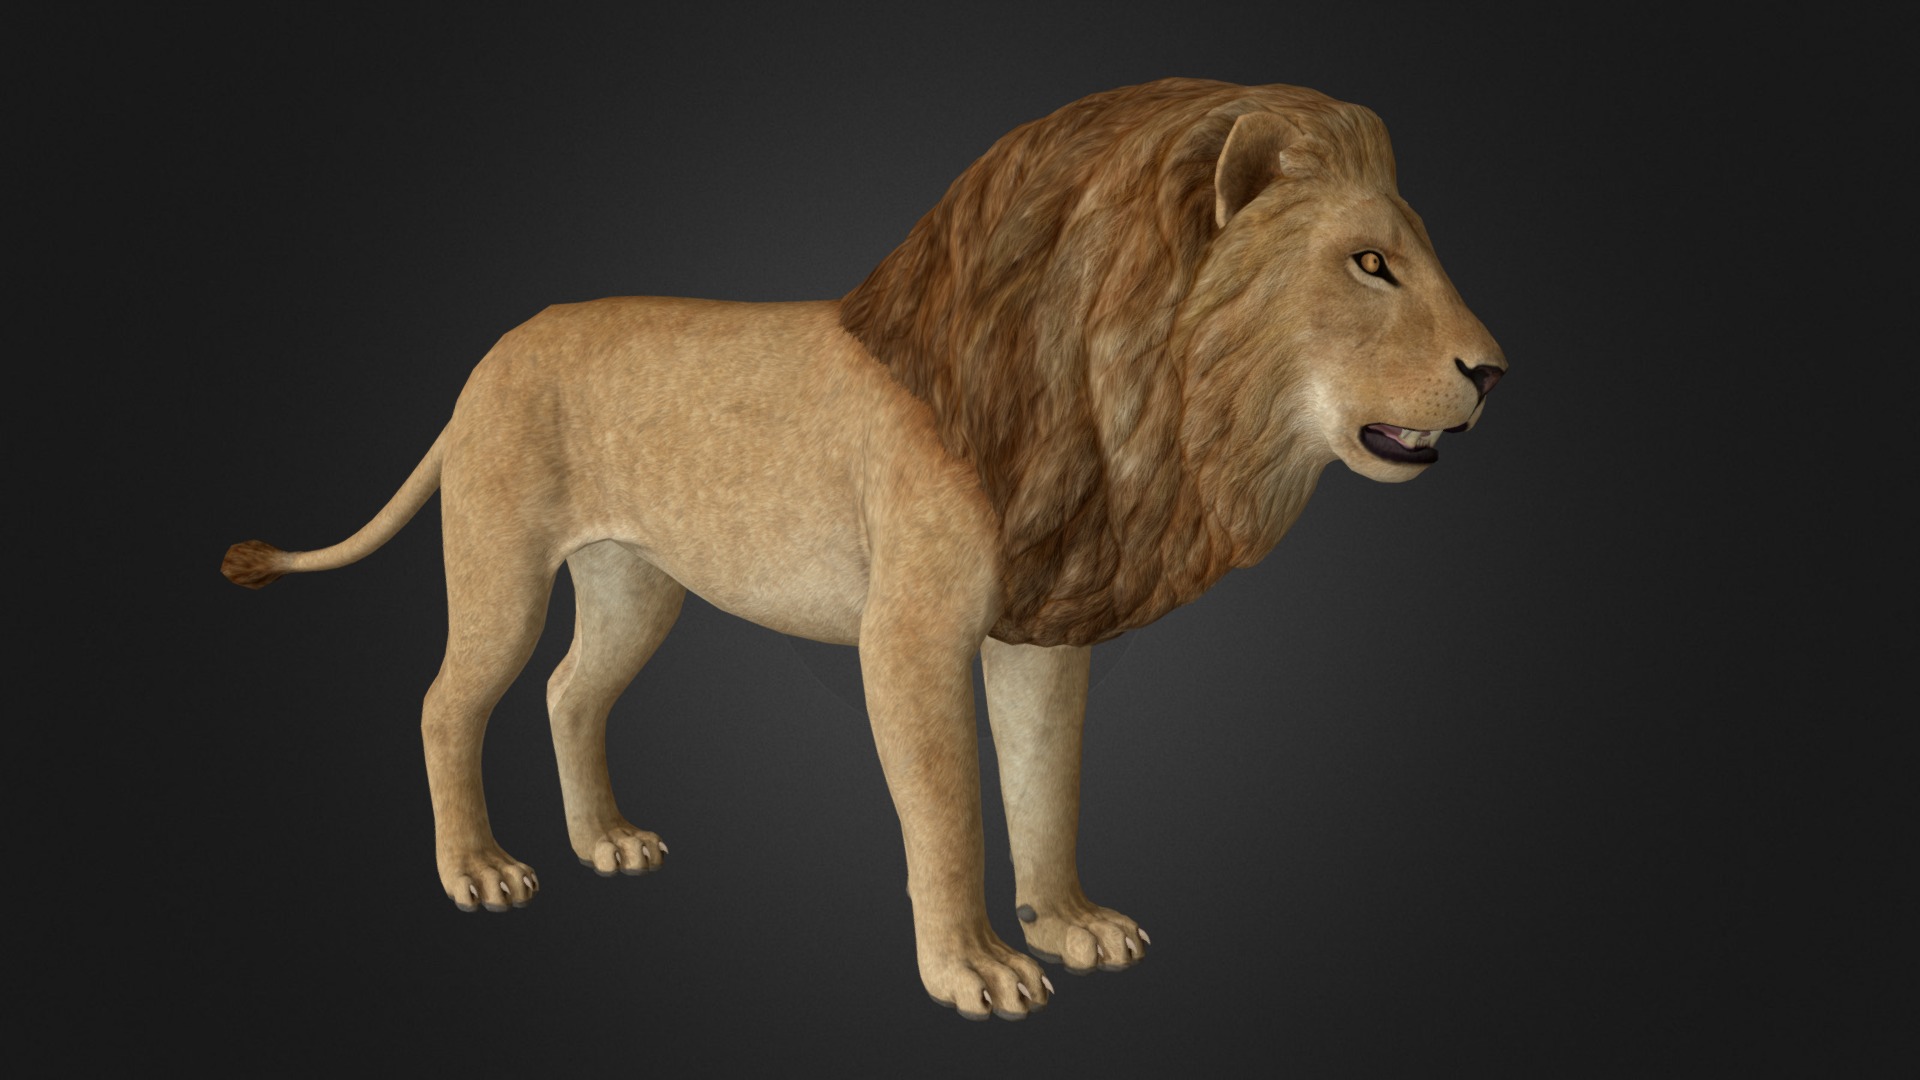 3D model 3D Lion - This is a 3D model of the 3D Lion. The 3D model is about a lion standing on a black background.